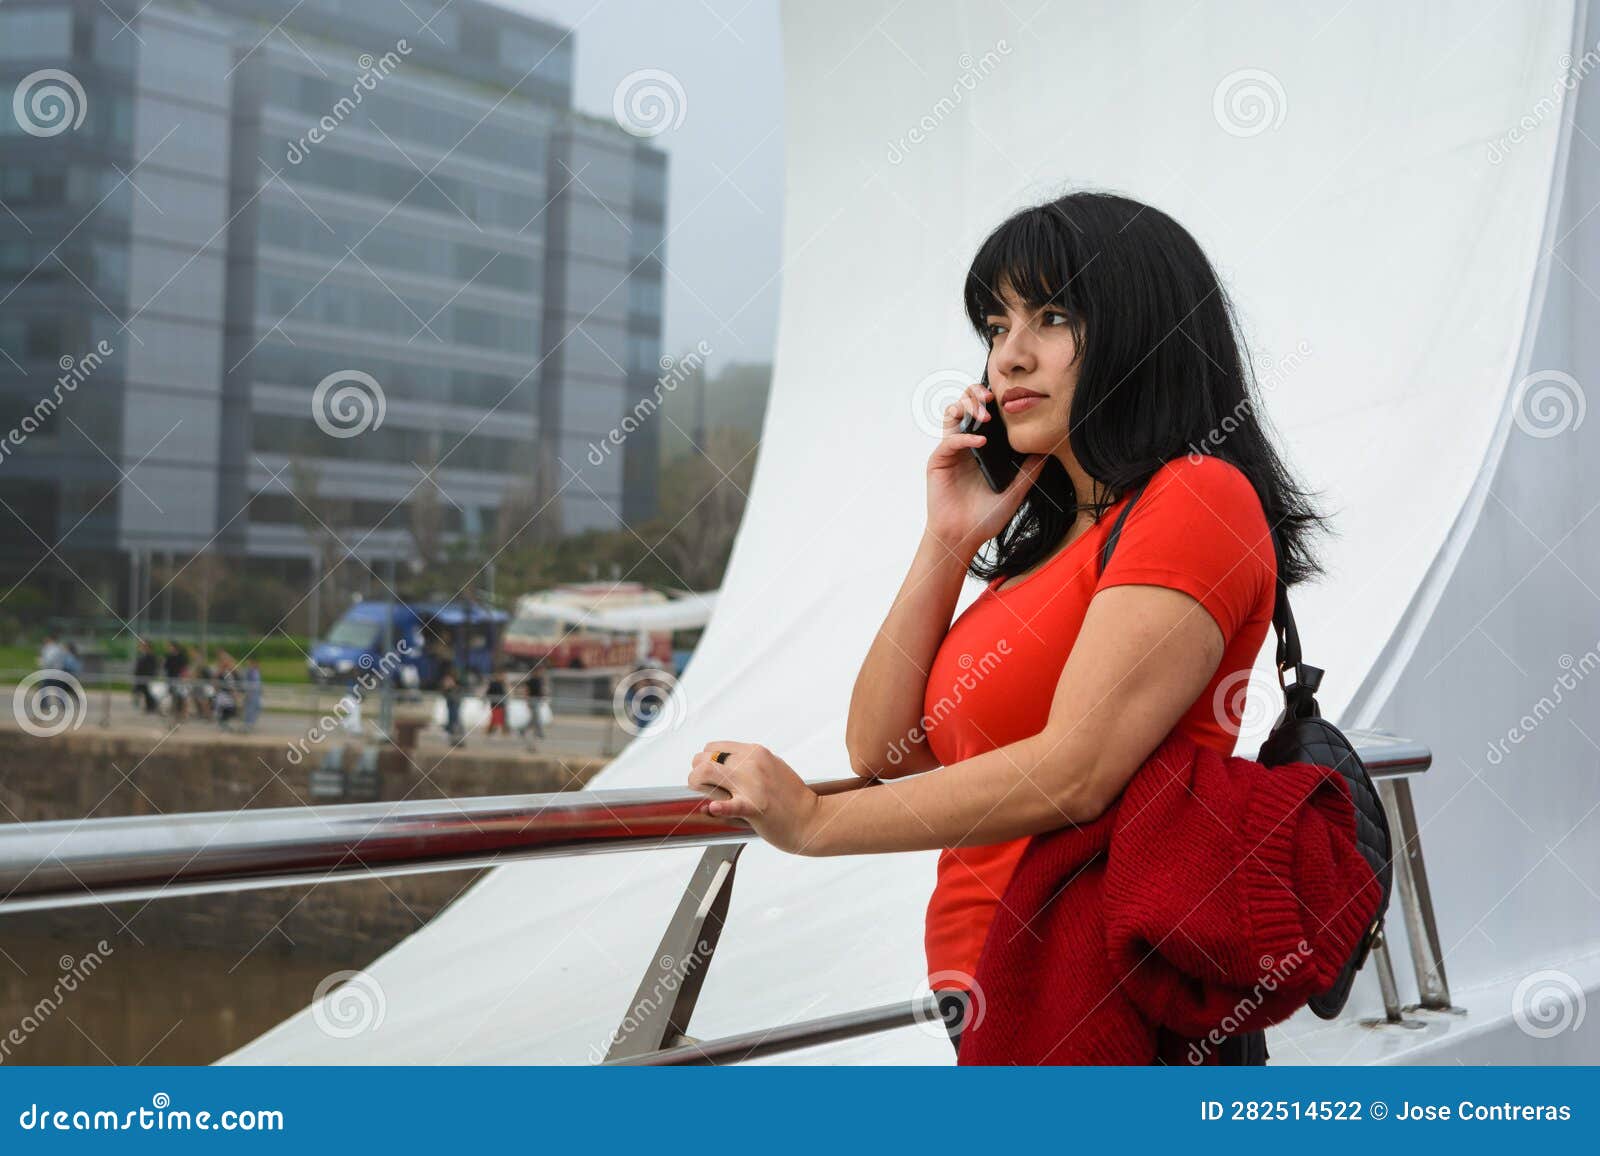 young latin woman standing on puente de la mujer in buenos aires worried on a phone call listening